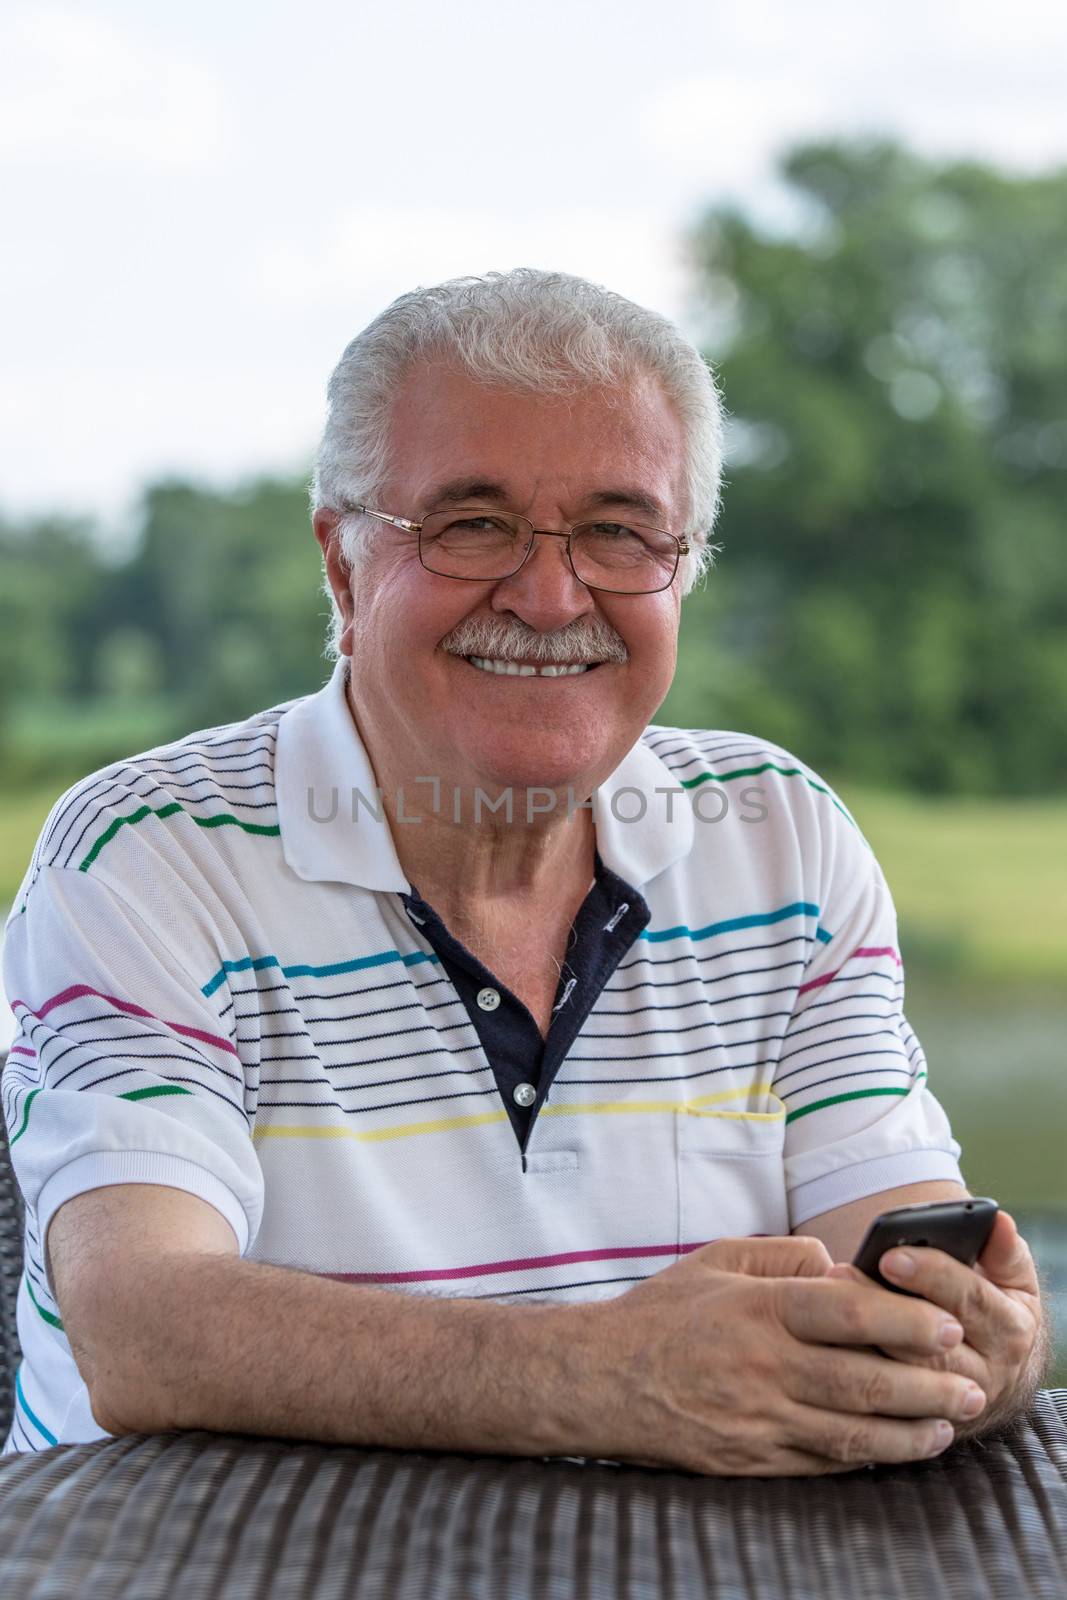 Grey hair senior gentleman looking trustfully with his glasses while holding his phone.